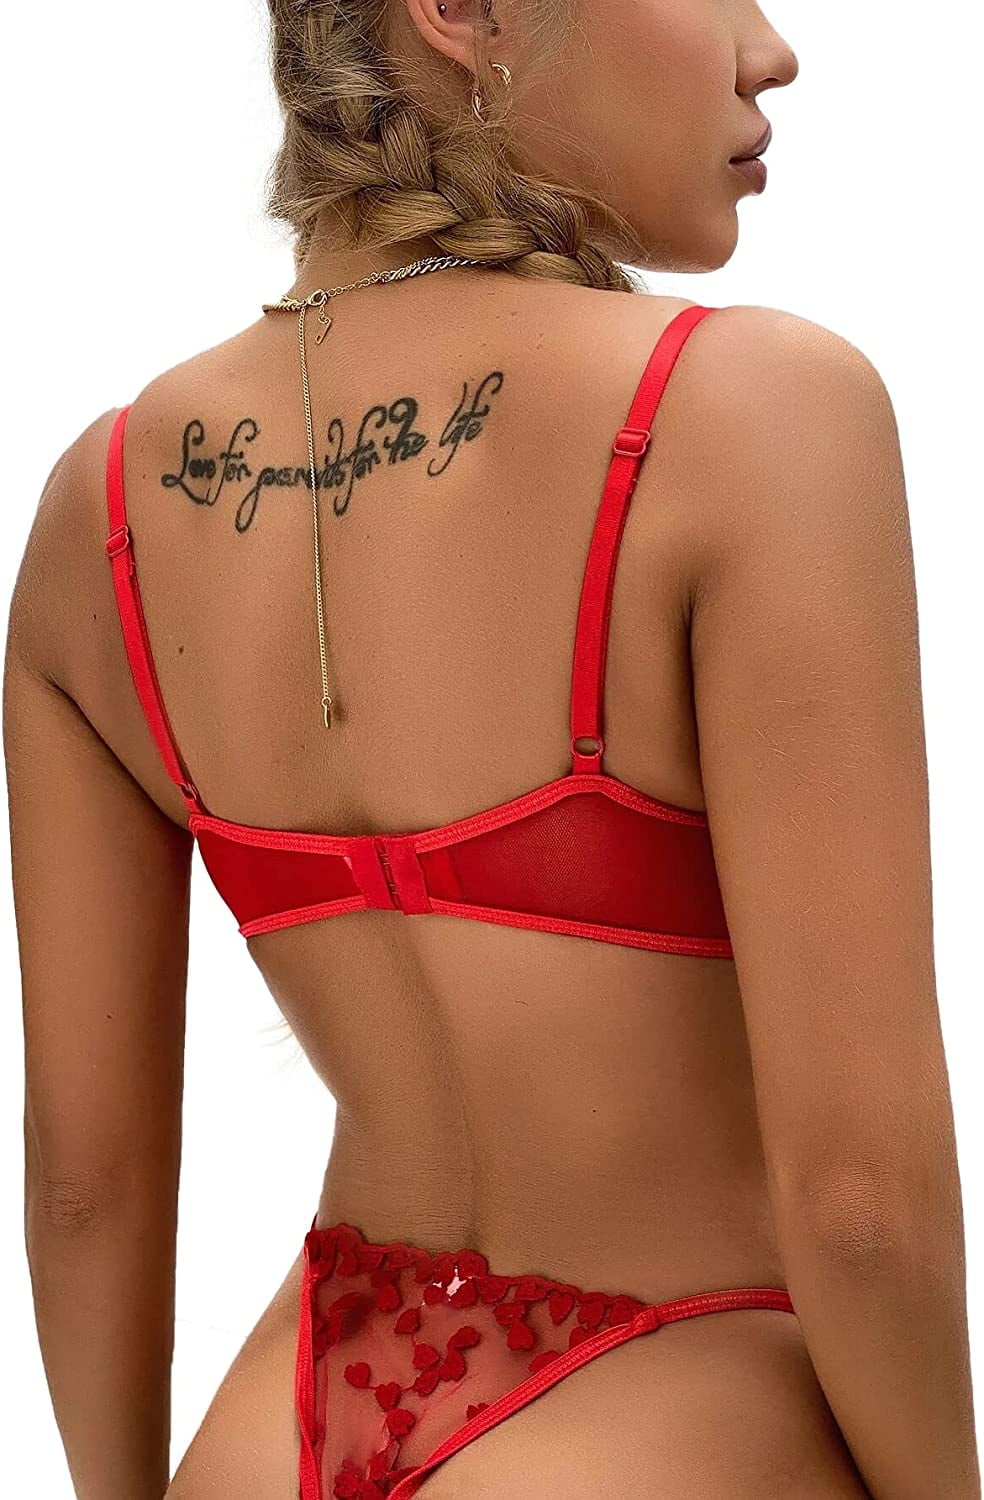 Lilosy Sexy Underwire Push Up Strappy Embroidered Mesh Sheer